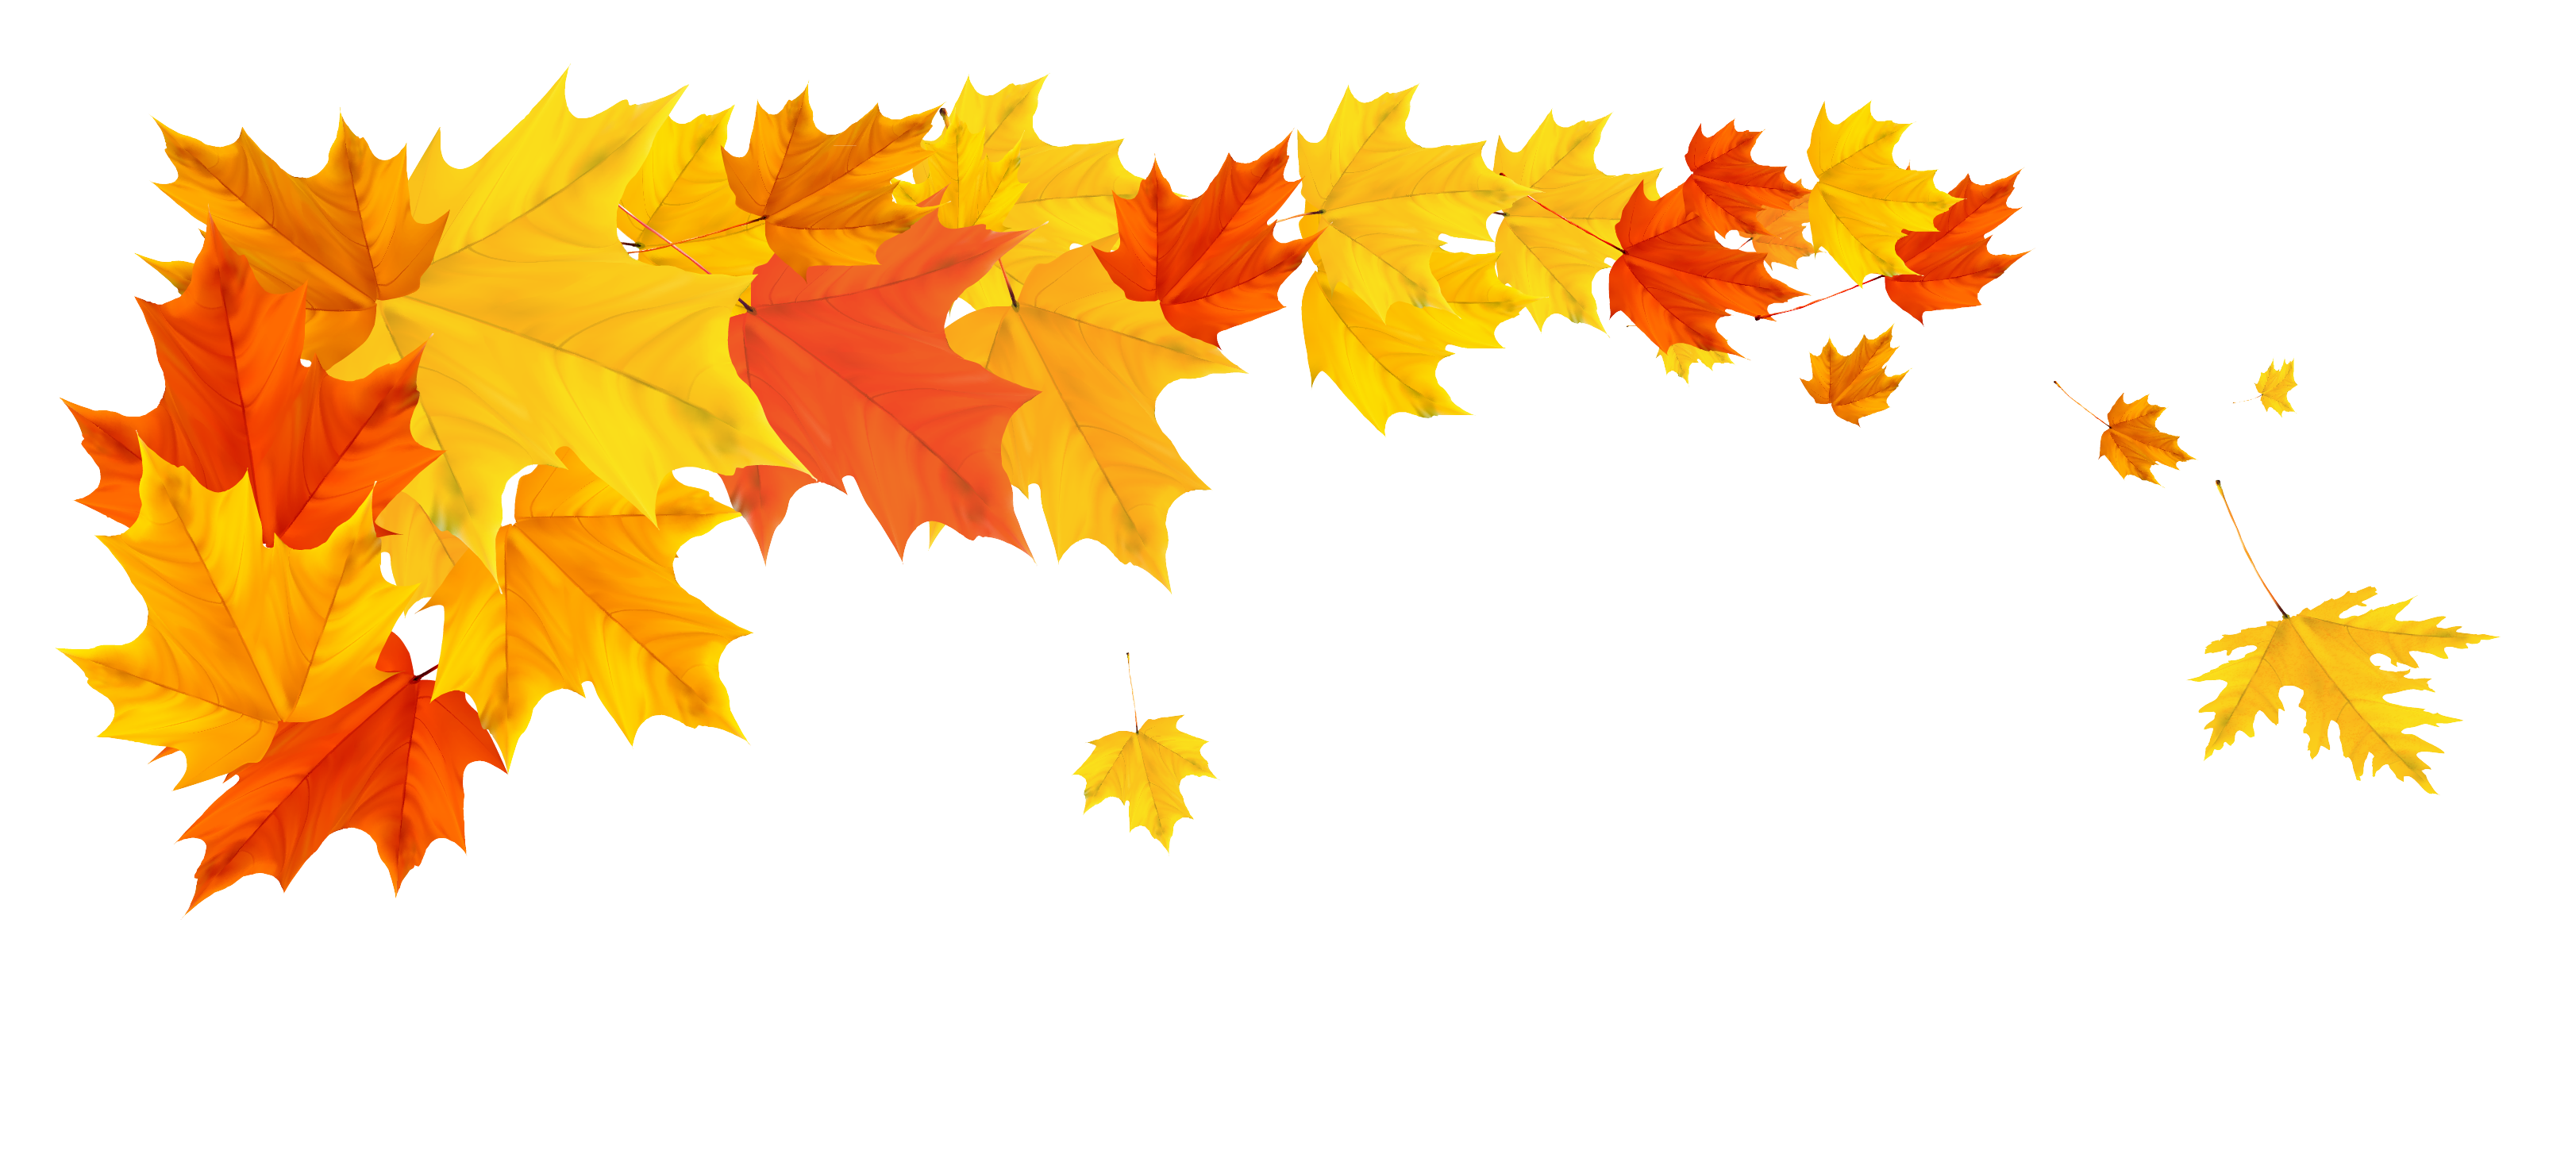 Orange Fall Leafs PNG Clipart Picture​-Quality Image and Transparent PNG Free Clip. Clip art, Free clip art, Desktop wallpaper fall